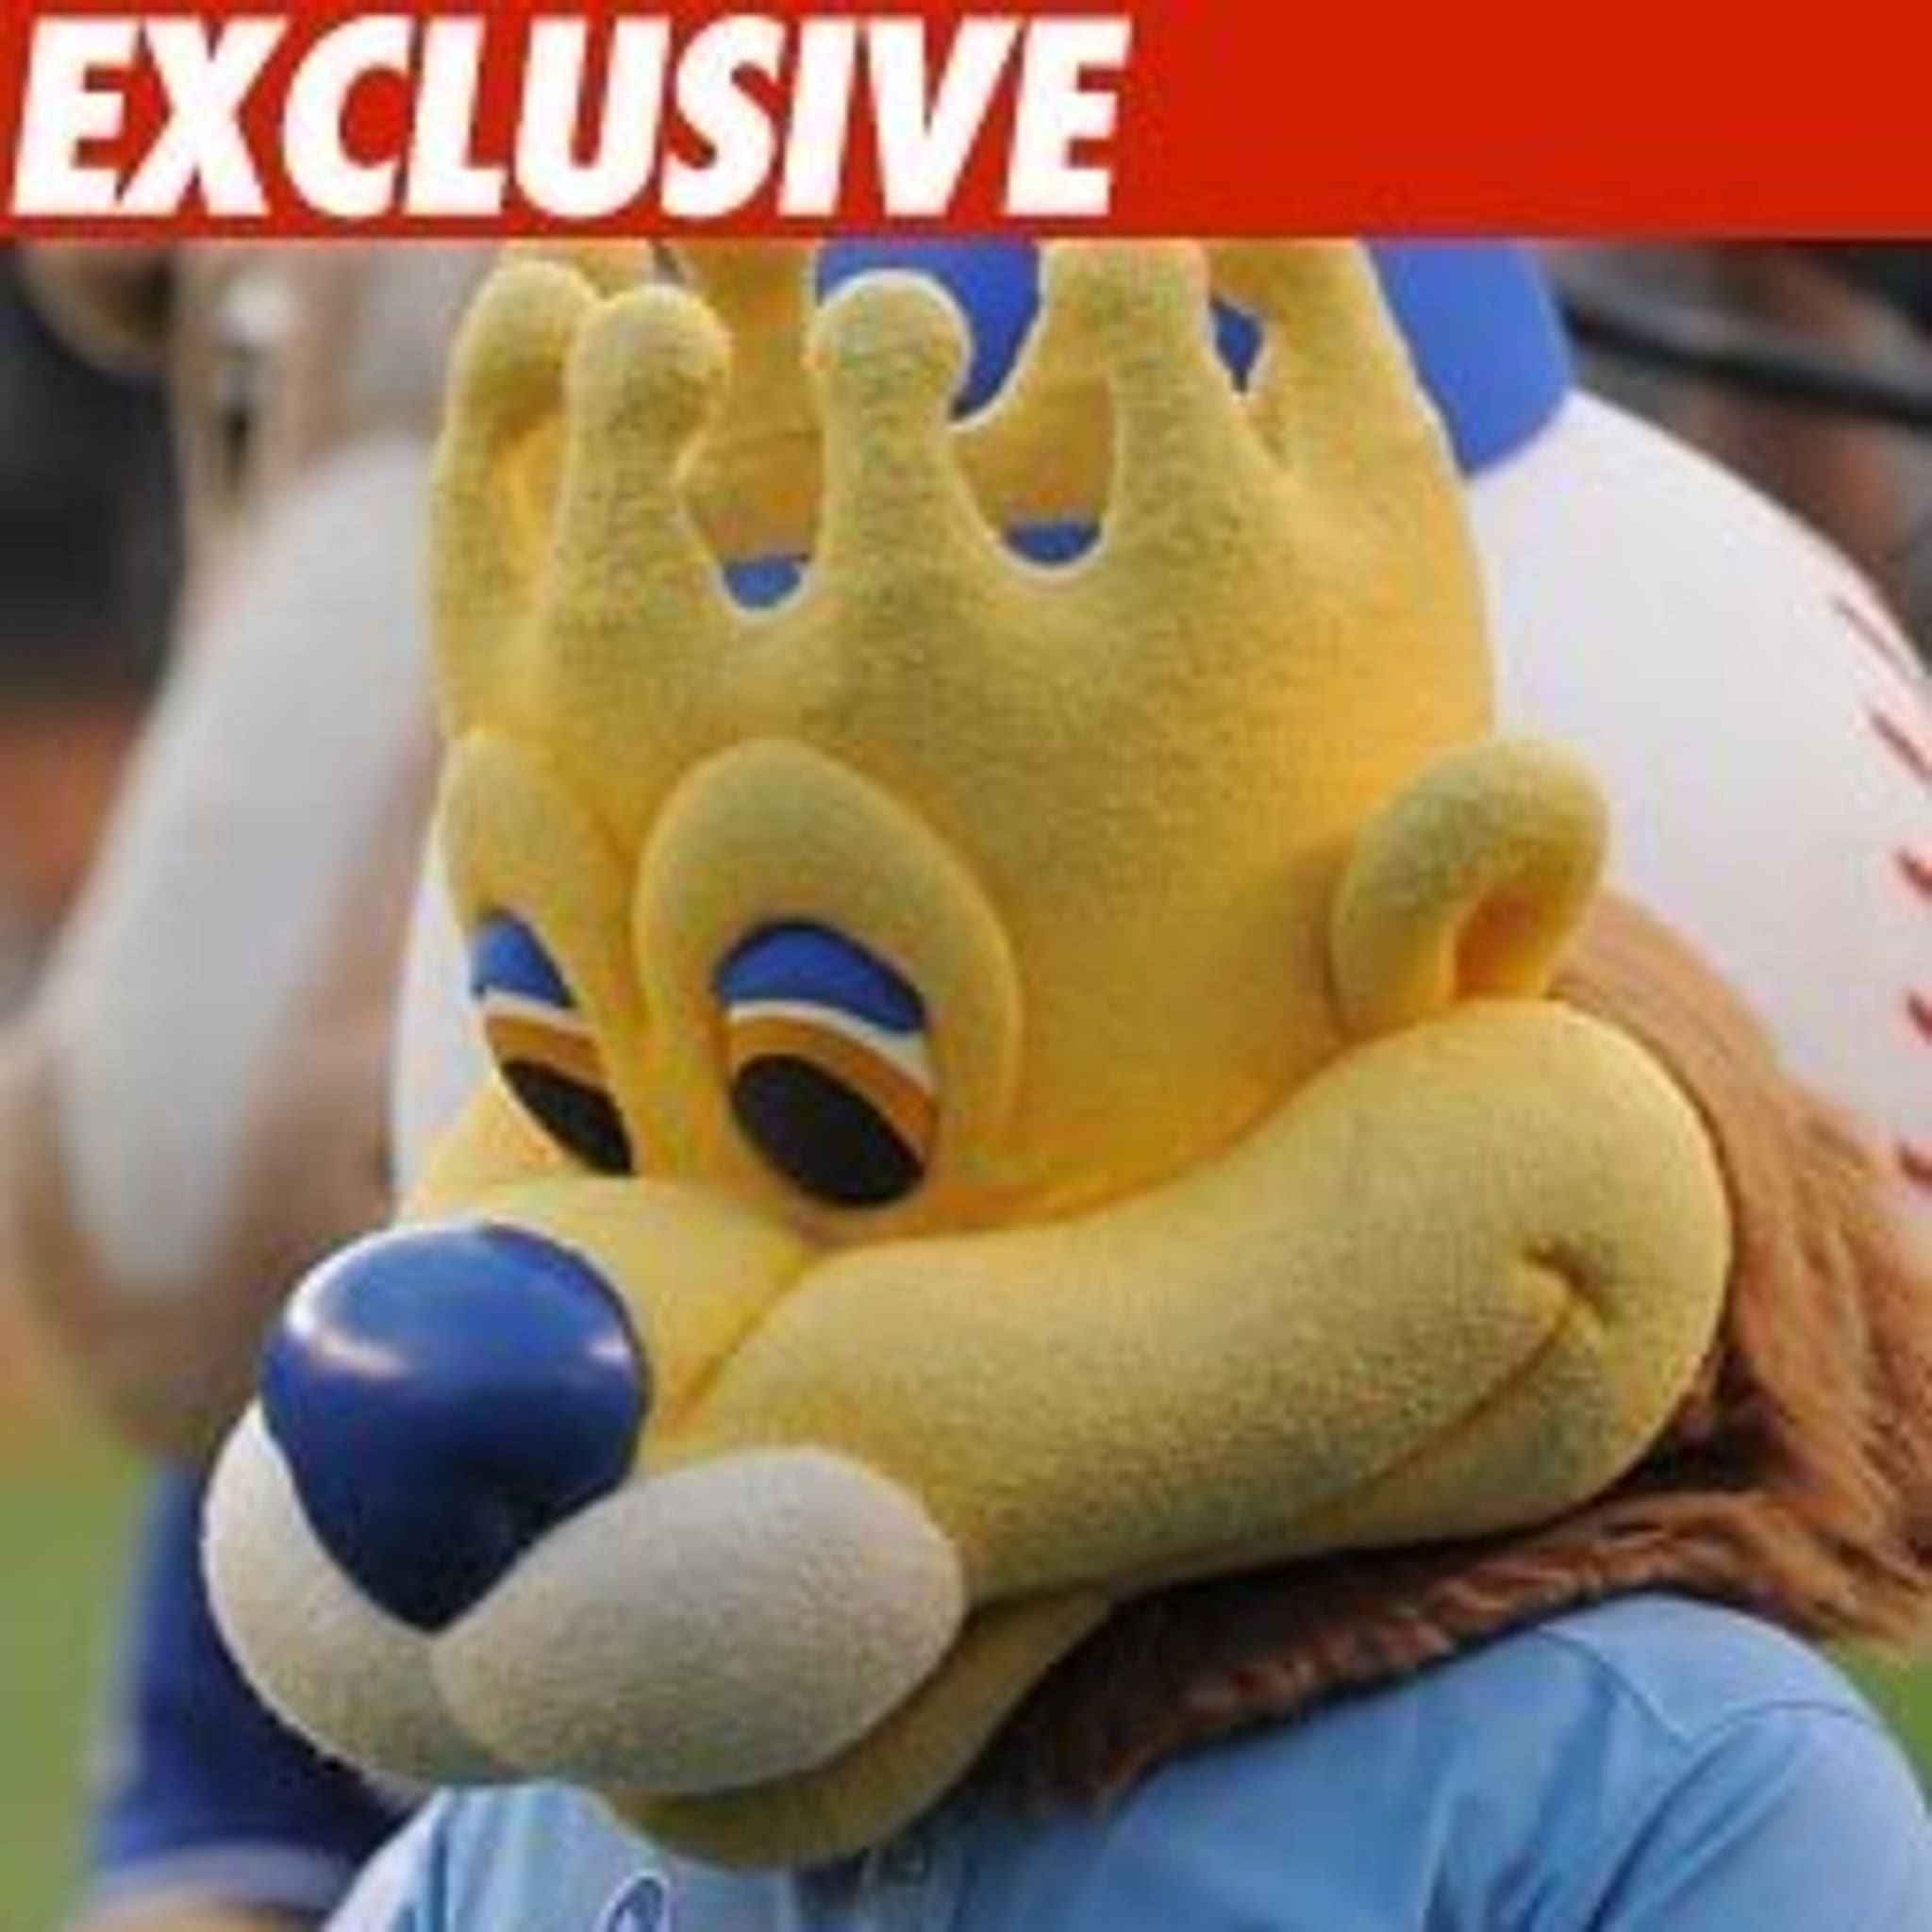 Royals mascot Sluggerrr brought his dad to the game today : r/baseball